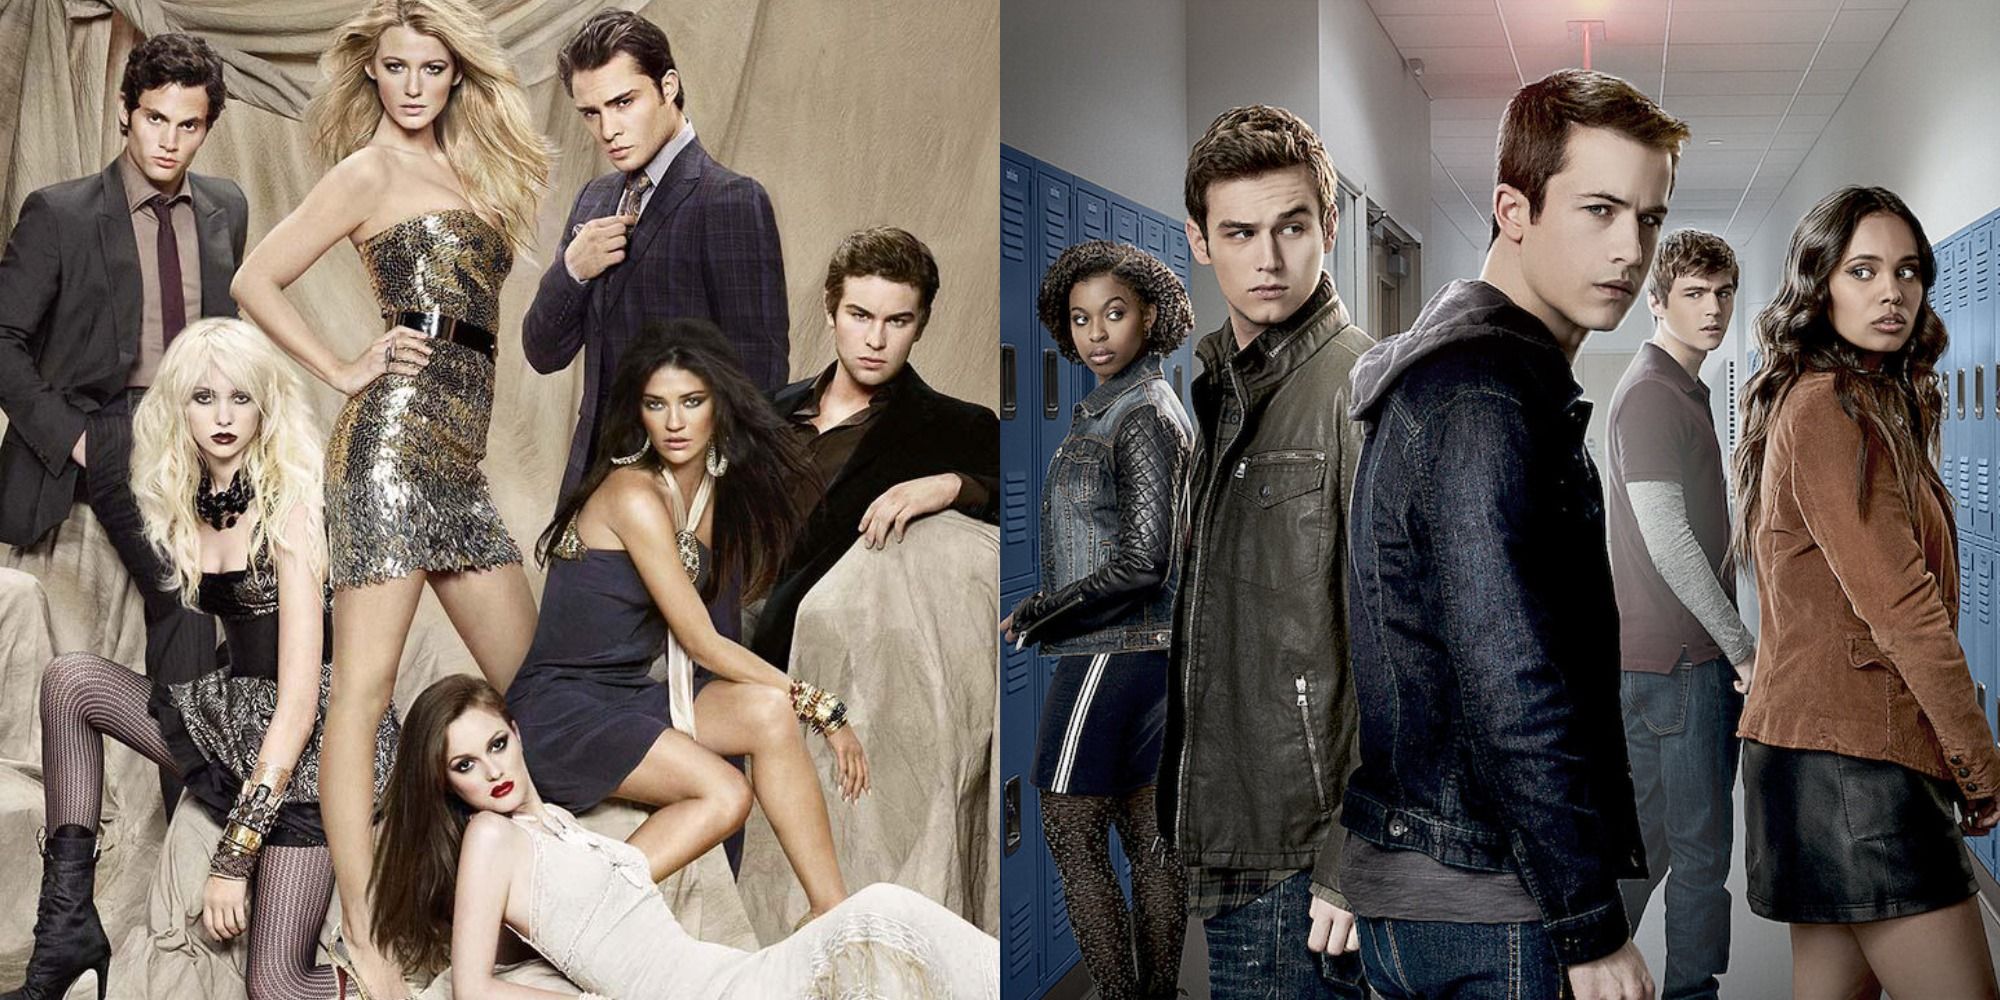 Split image showing the casts of the original Gossip Girl and 13 Reasons Why